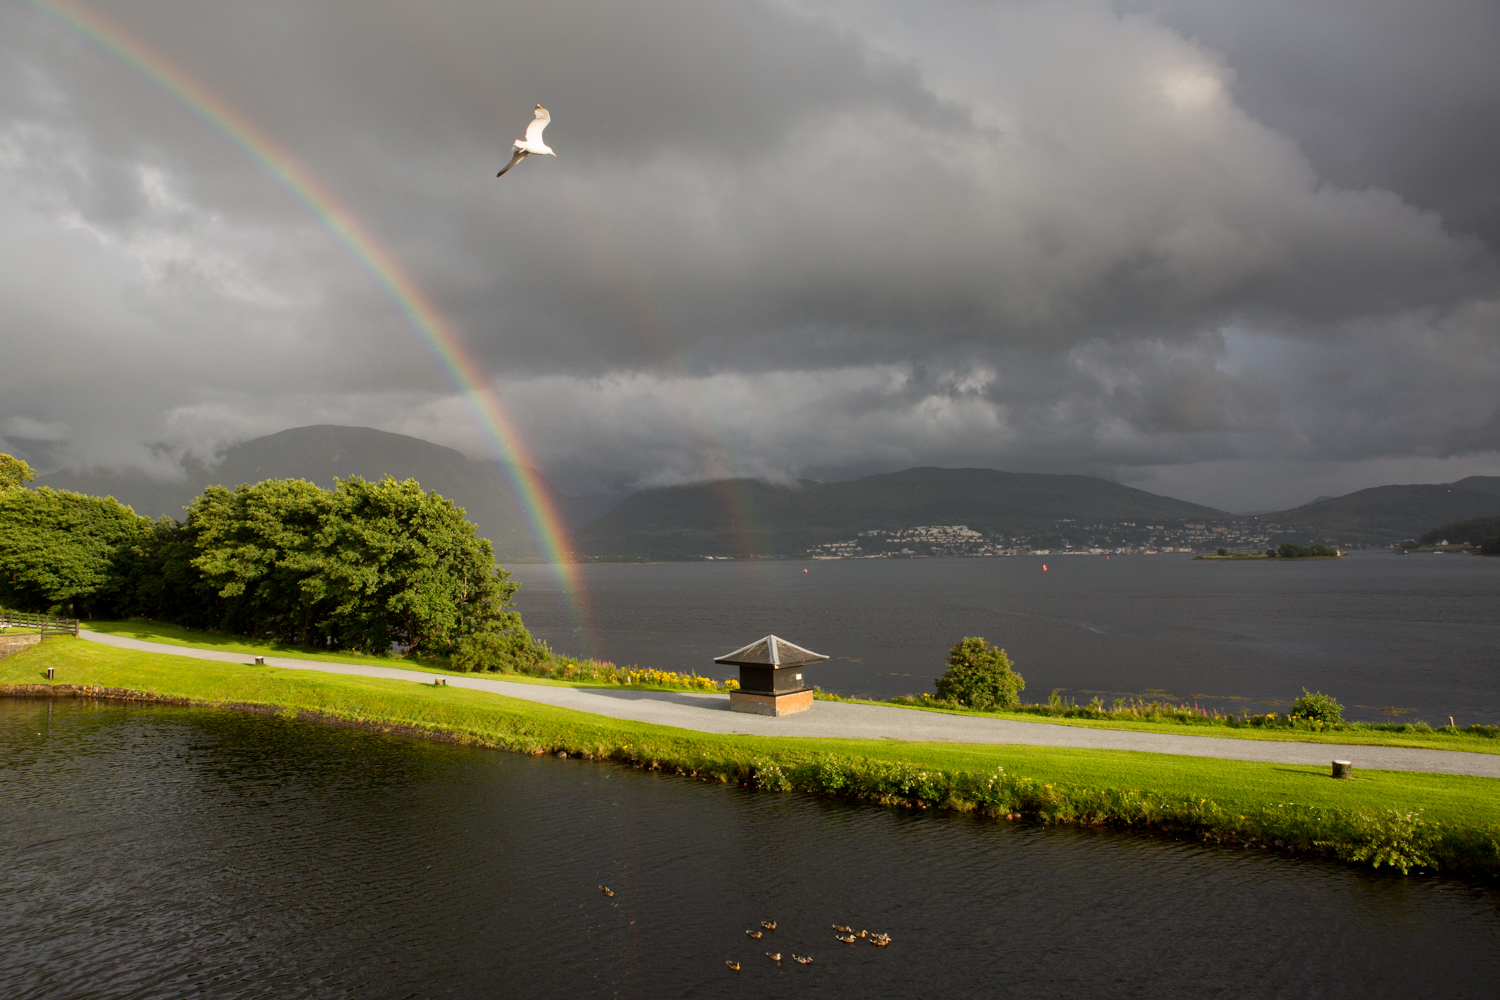  While docked in Scotland's Caledonian Canal sea locks at Corpach, a double rainbow emerged to frame a flying gull and a team of ducks floating in the water. 